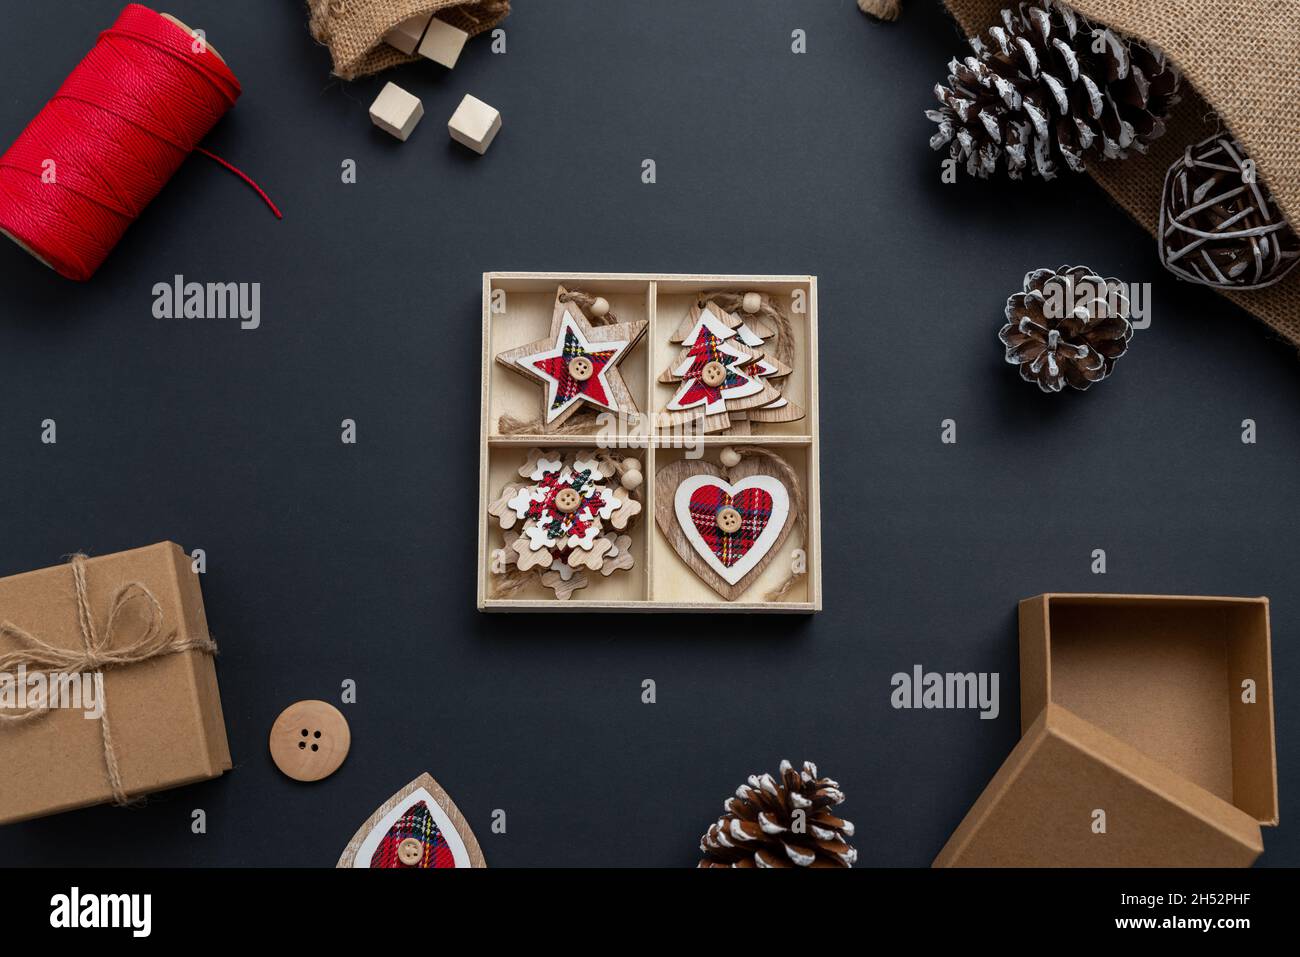 Unpacking Christmas decorations. Christmas composition with small wooden decorations for the Christmas tree. Top view, flat lay Stock Photo